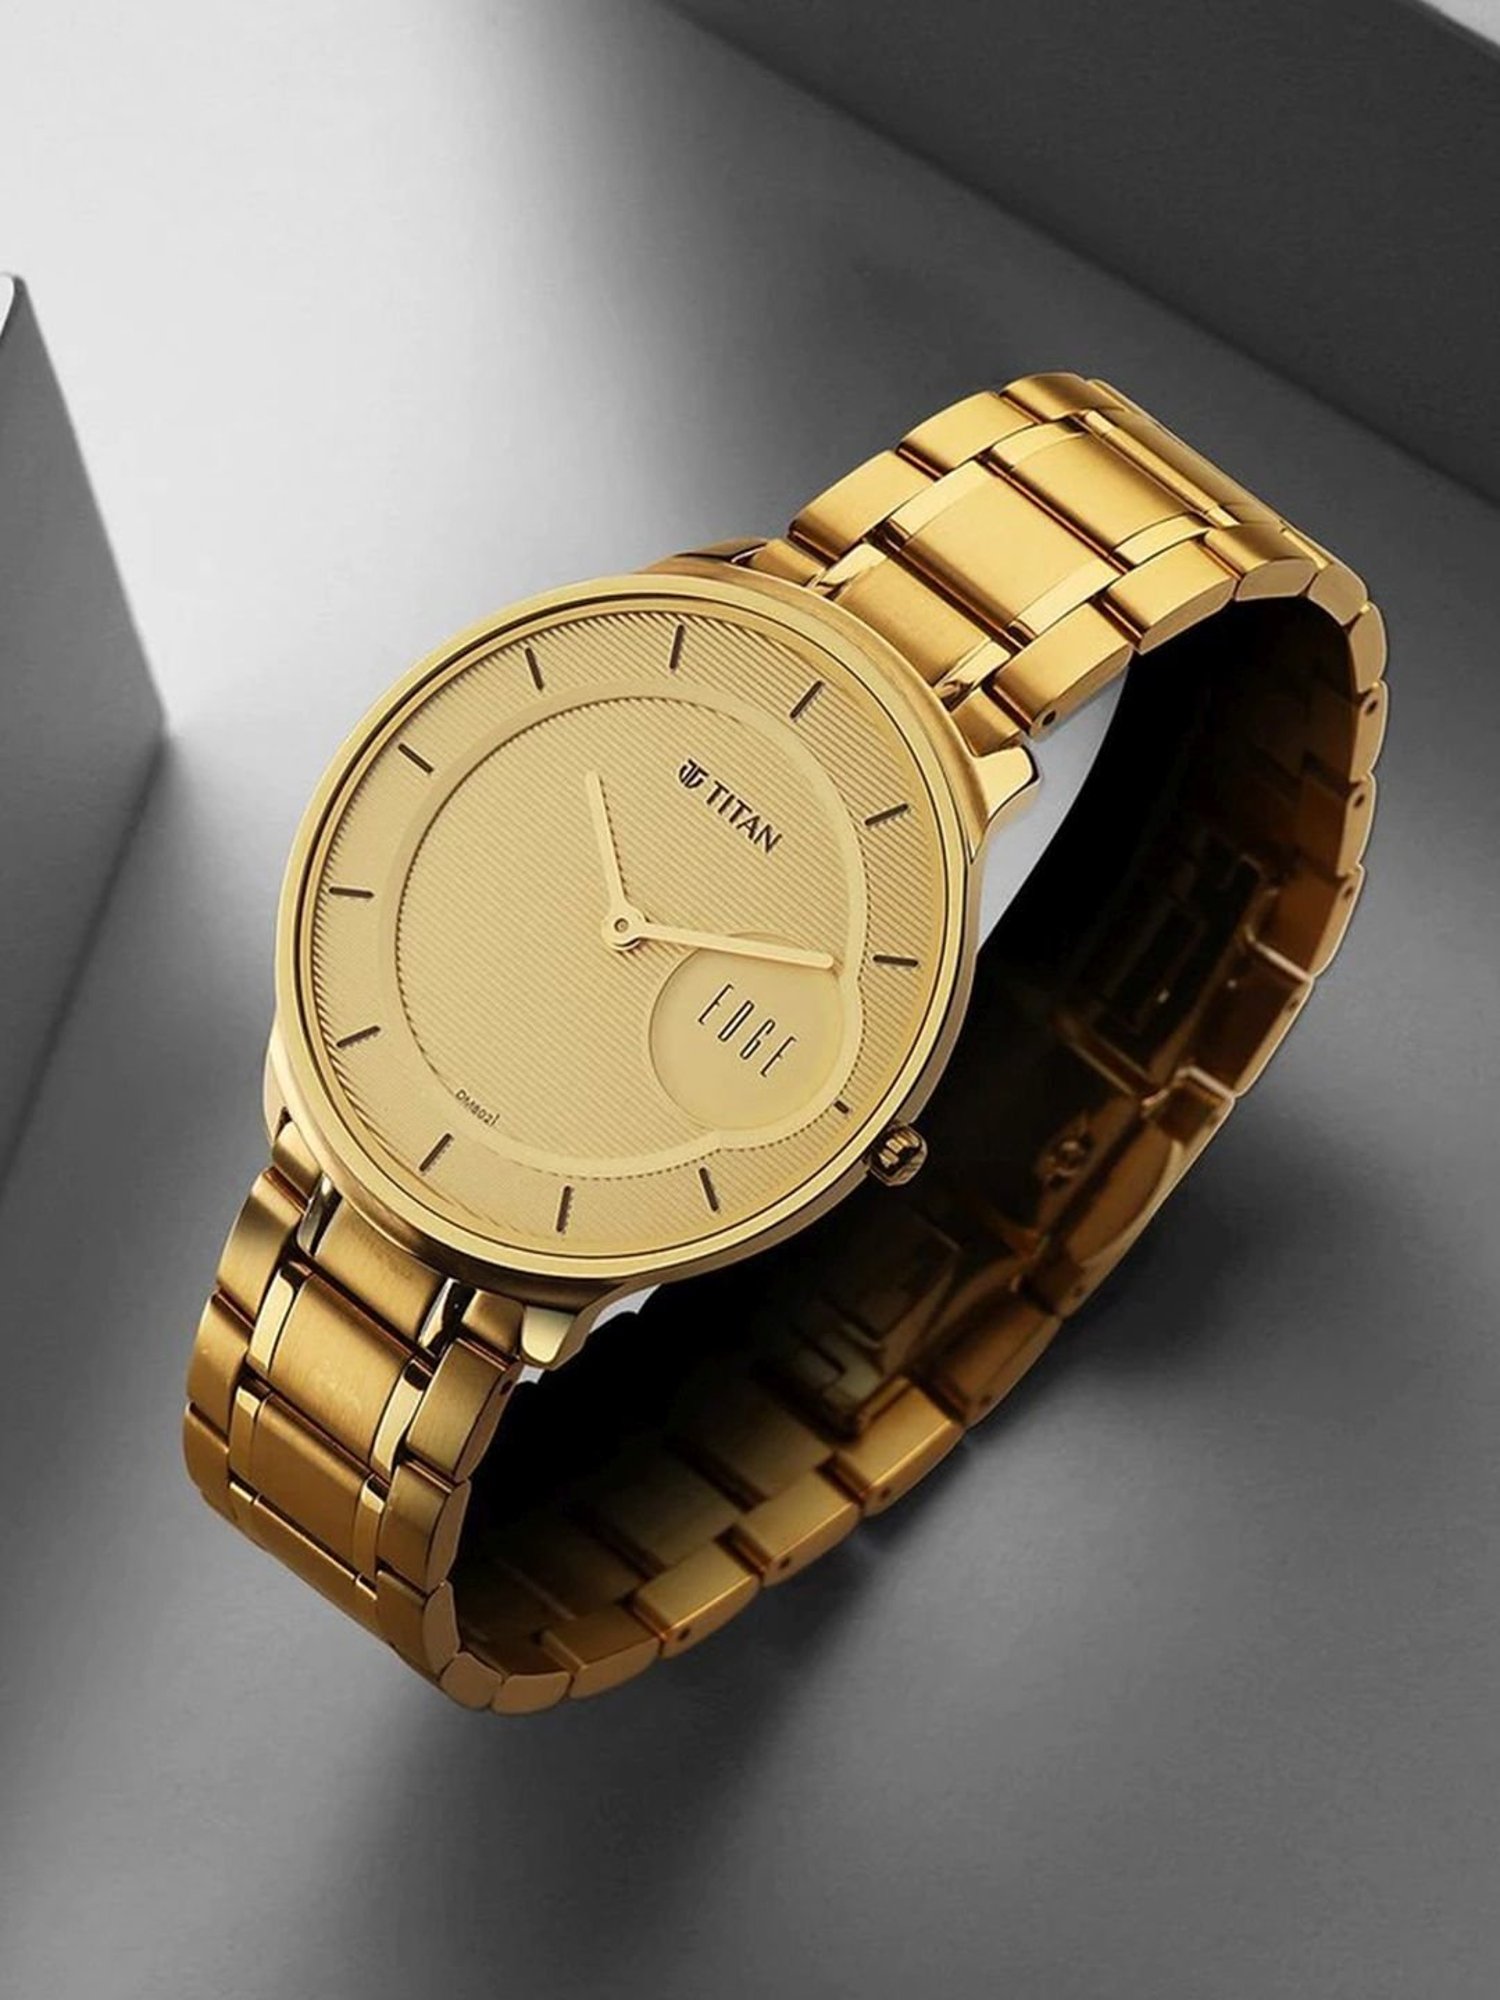 Best Watches on Daraz That'll Fit Your Budget - Daraz Life